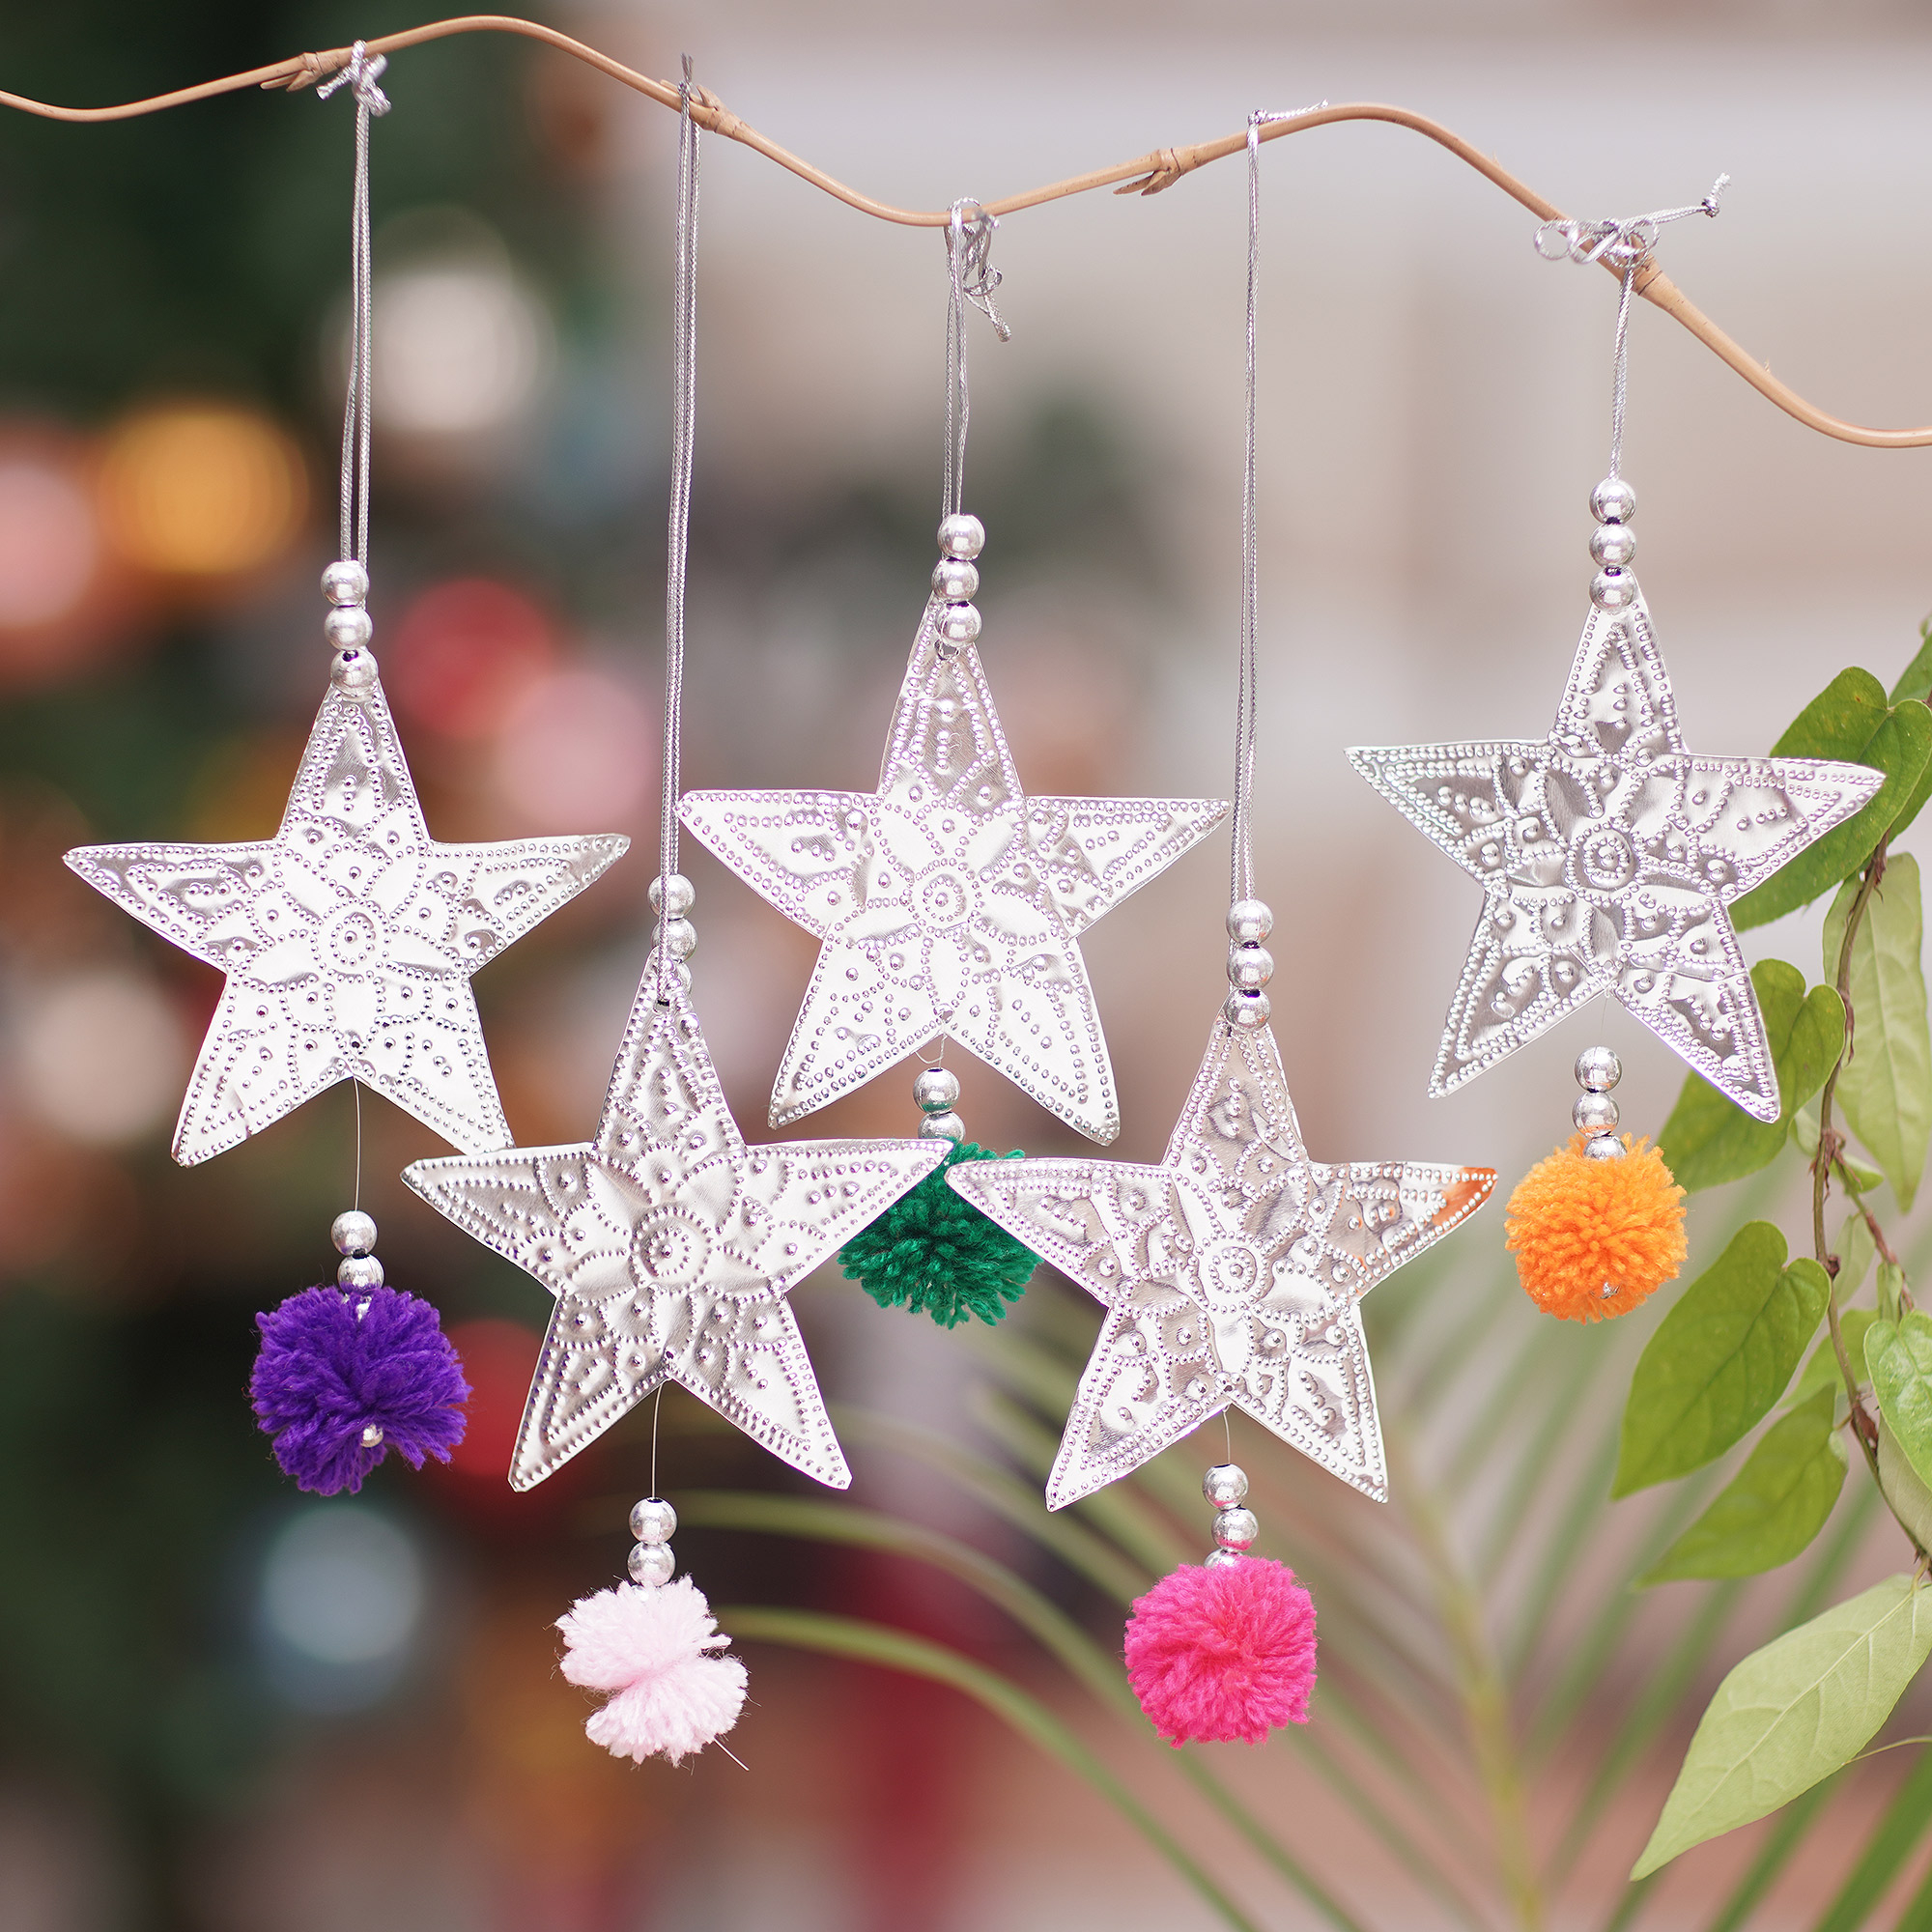 Shine Bright With Wholesale wire crystal garland 